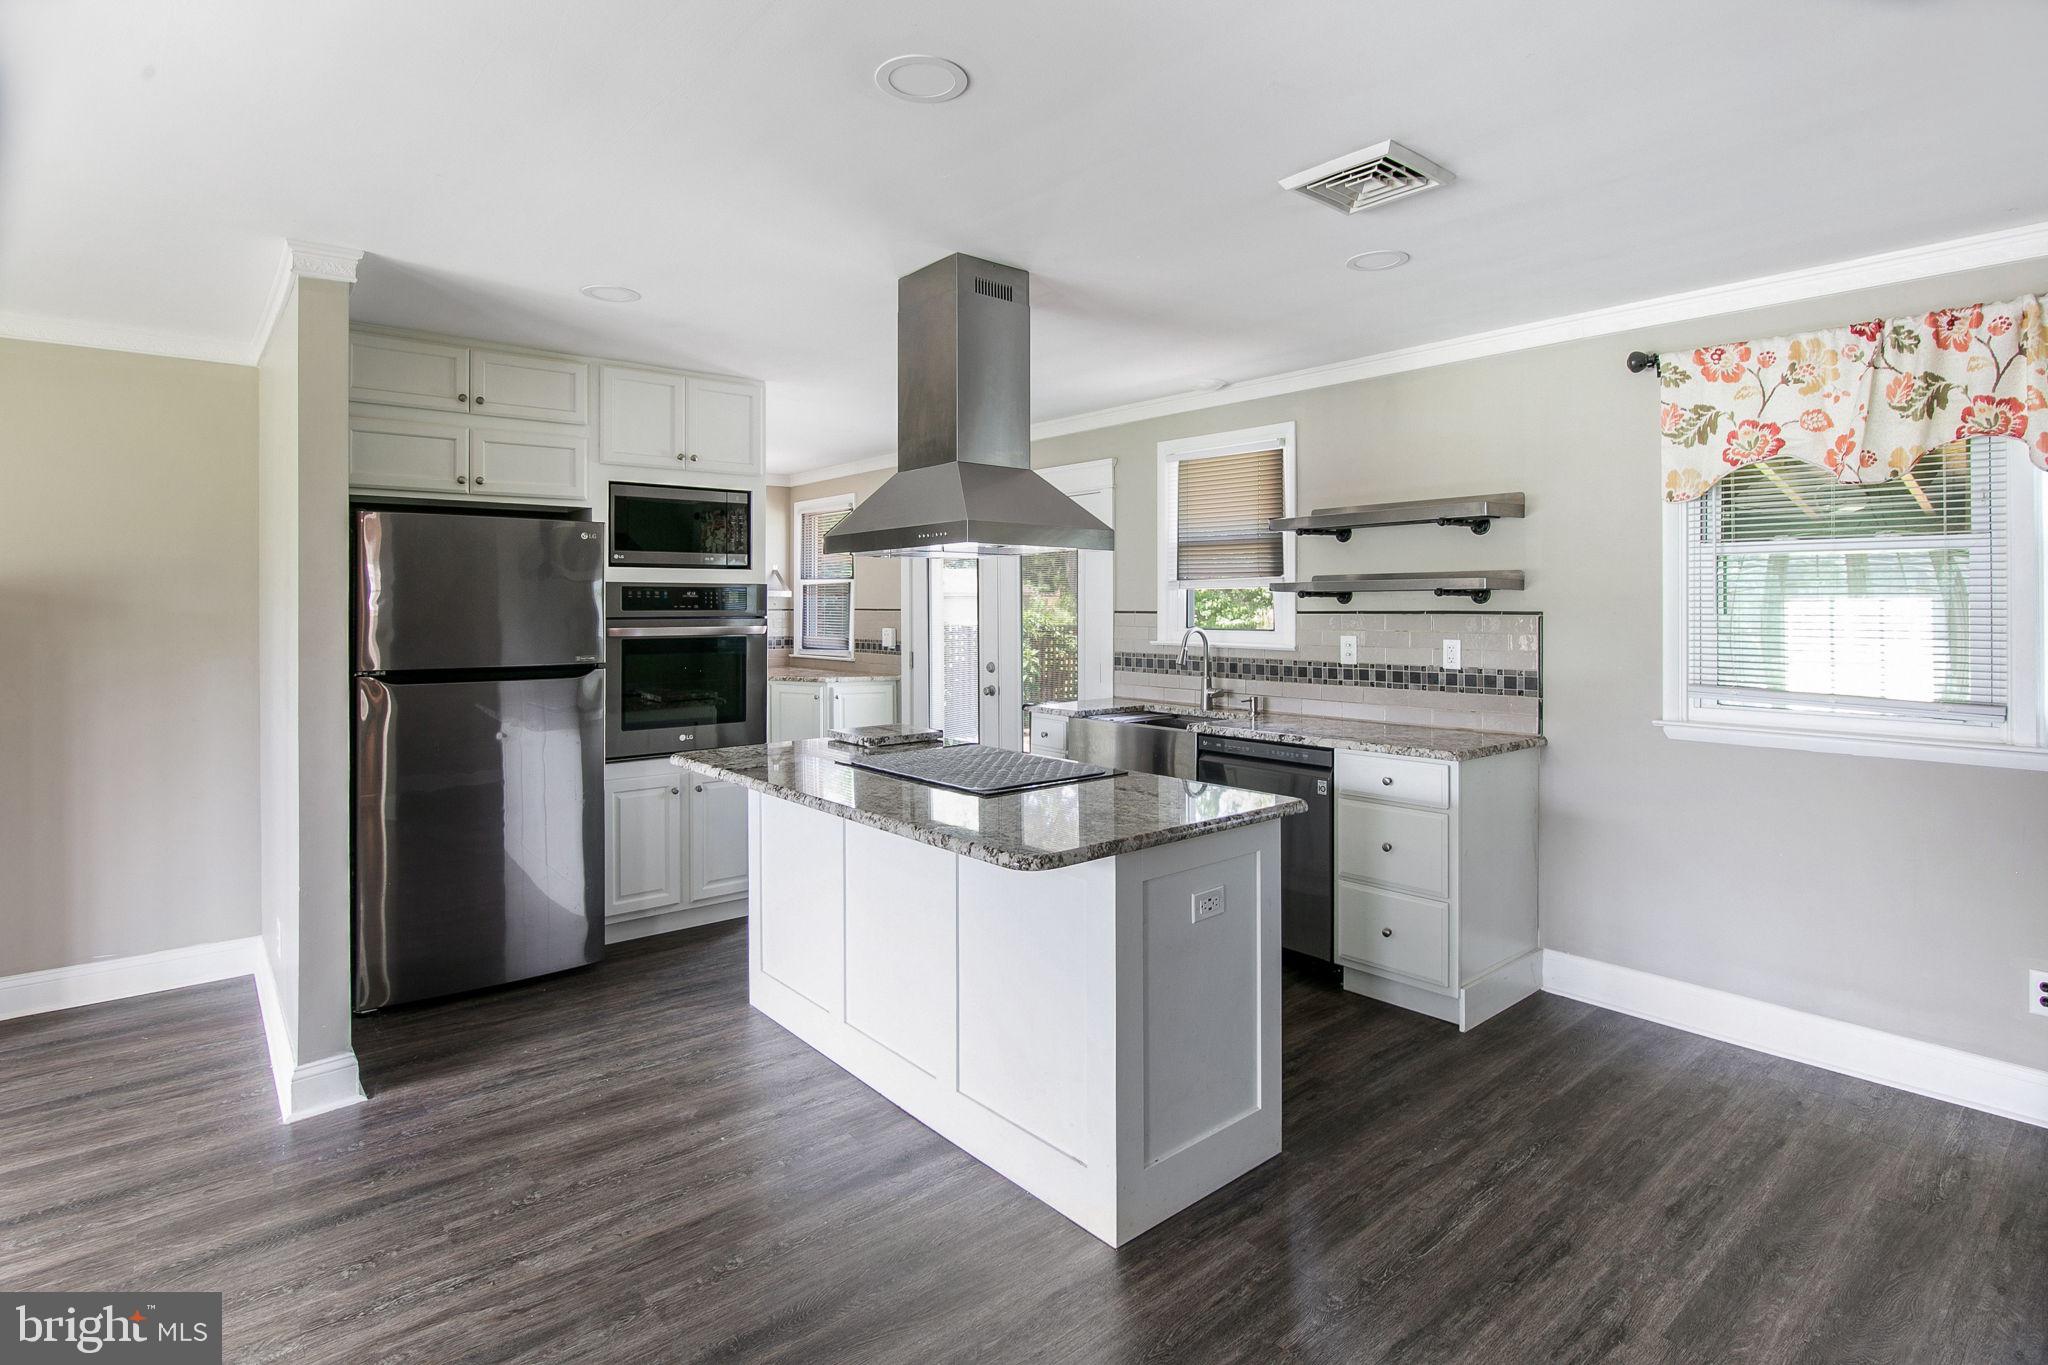 a kitchen with stainless steel appliances a sink a stove a refrigerator and wooden floor